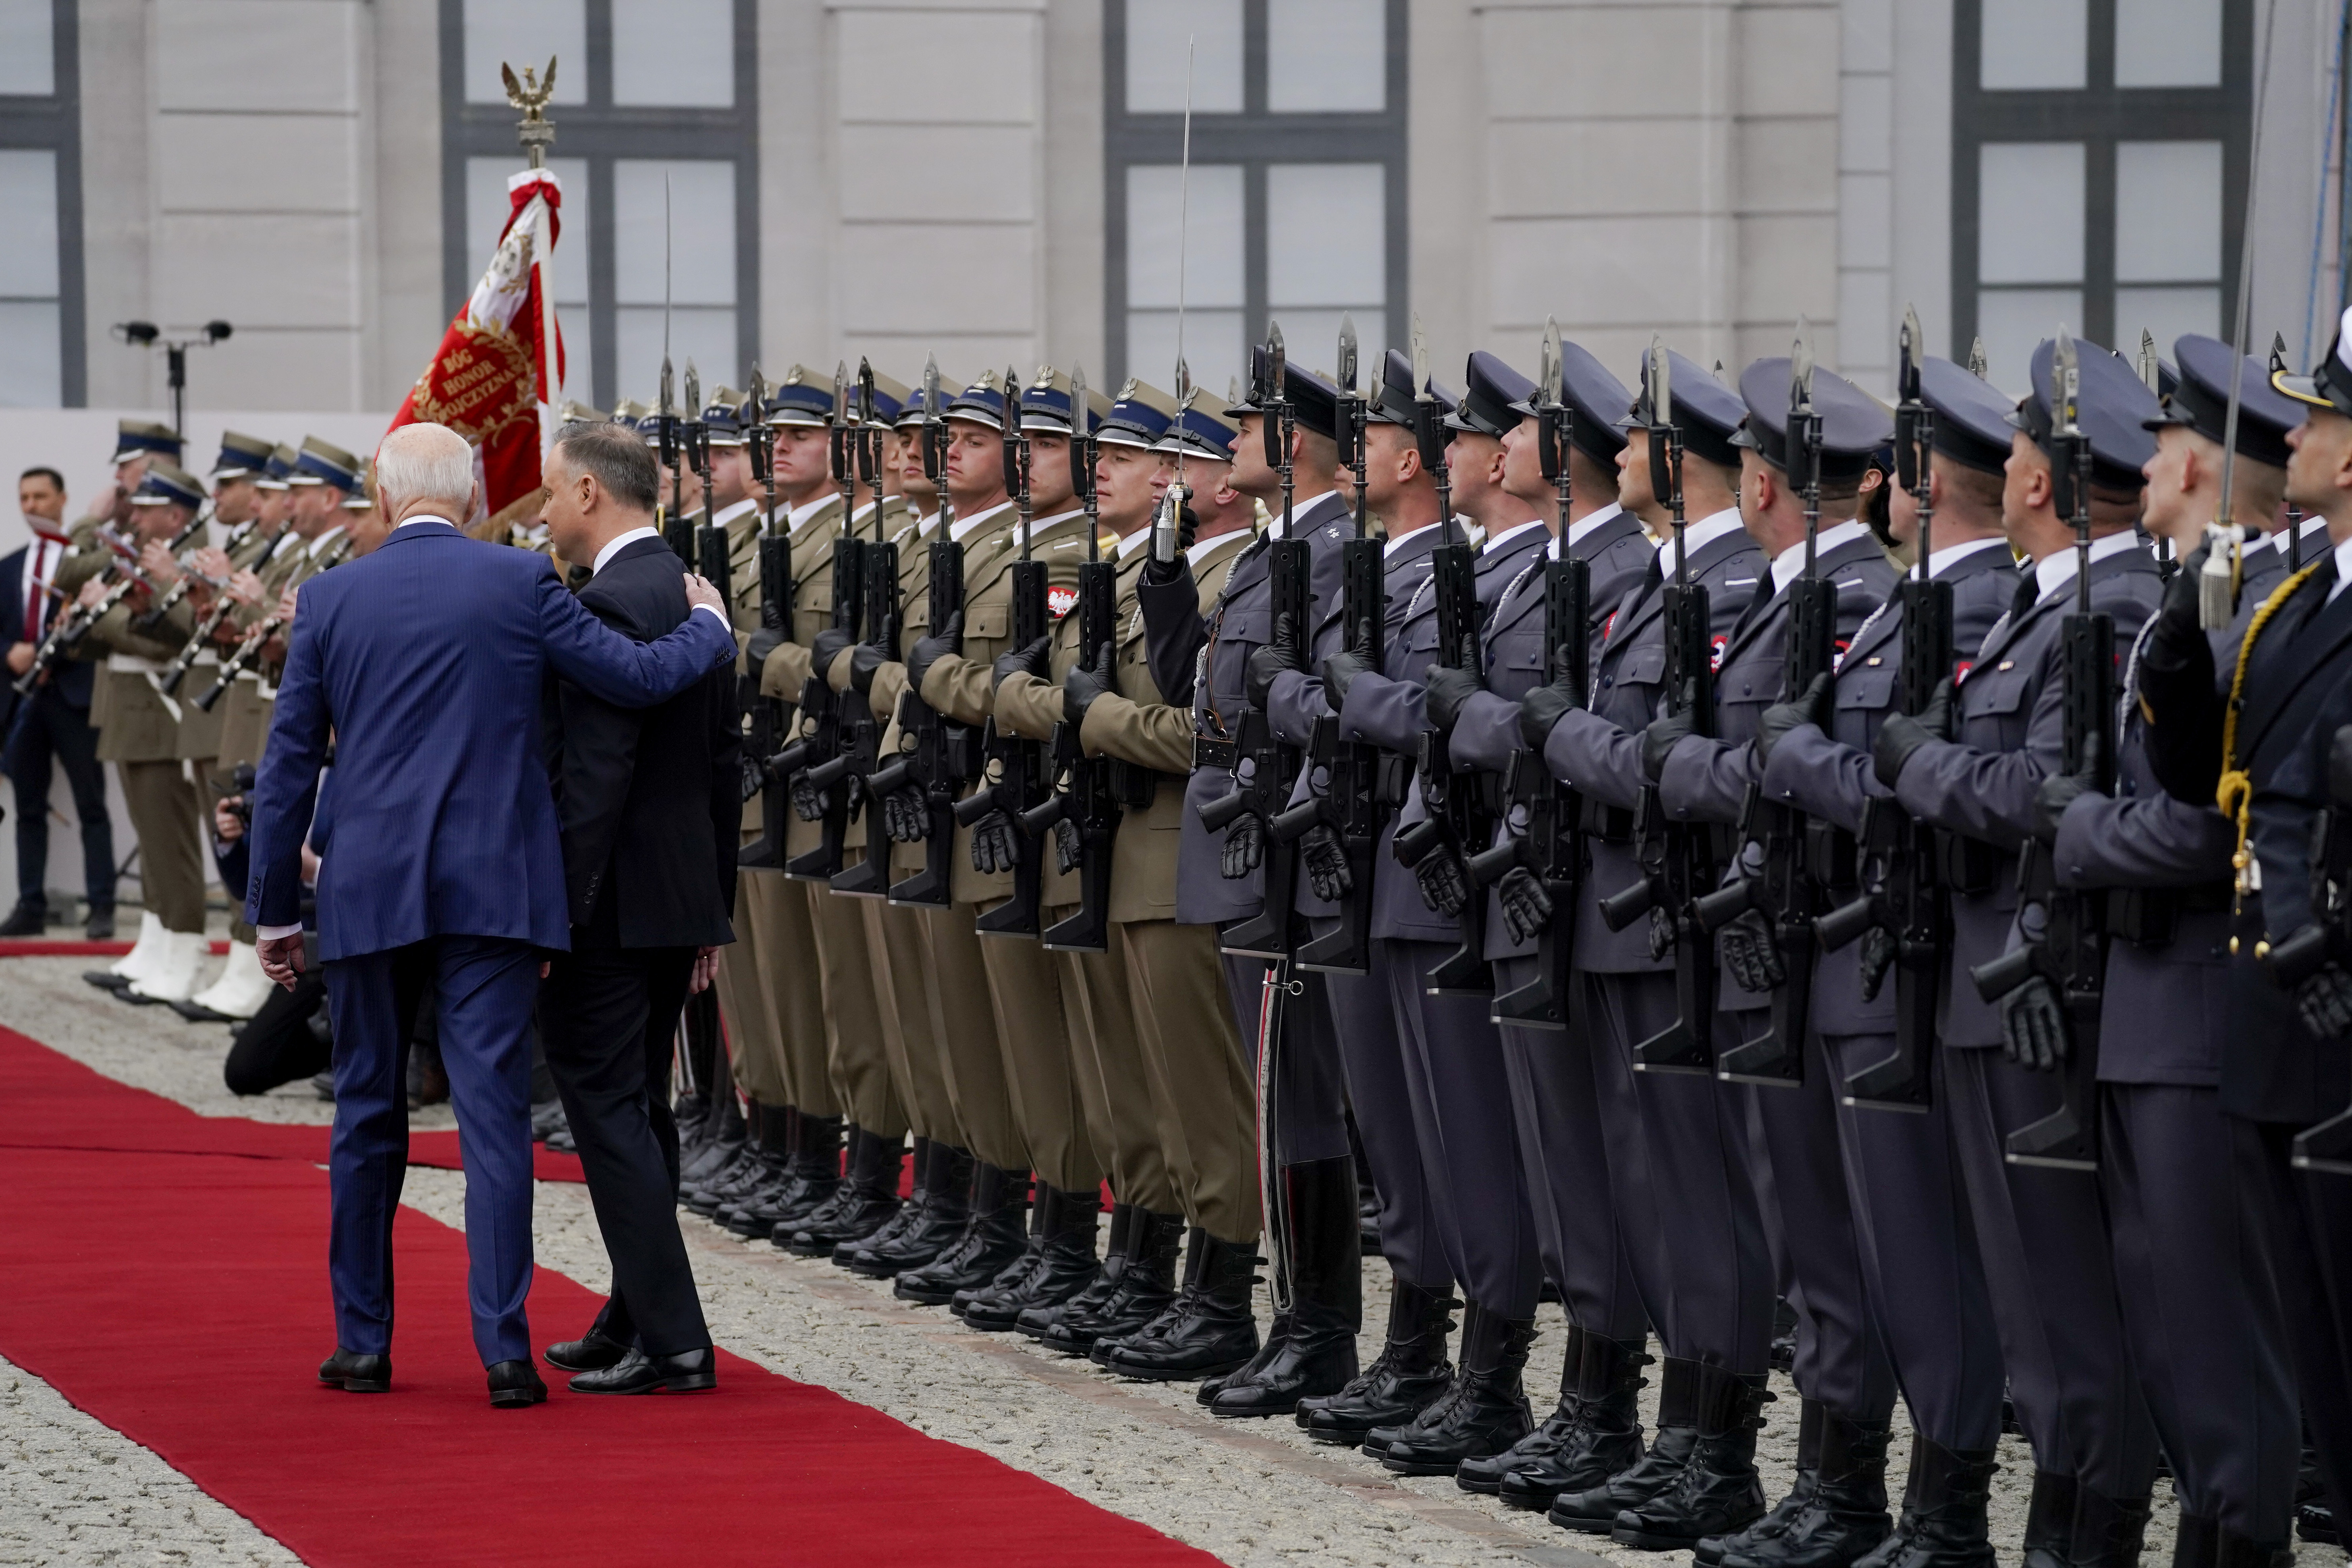 President Joe Biden participates in an arrival ceremony with Polish President Andrzej Duda at the Presidential Palace, Saturday, March 26, 2022, in Warsaw.